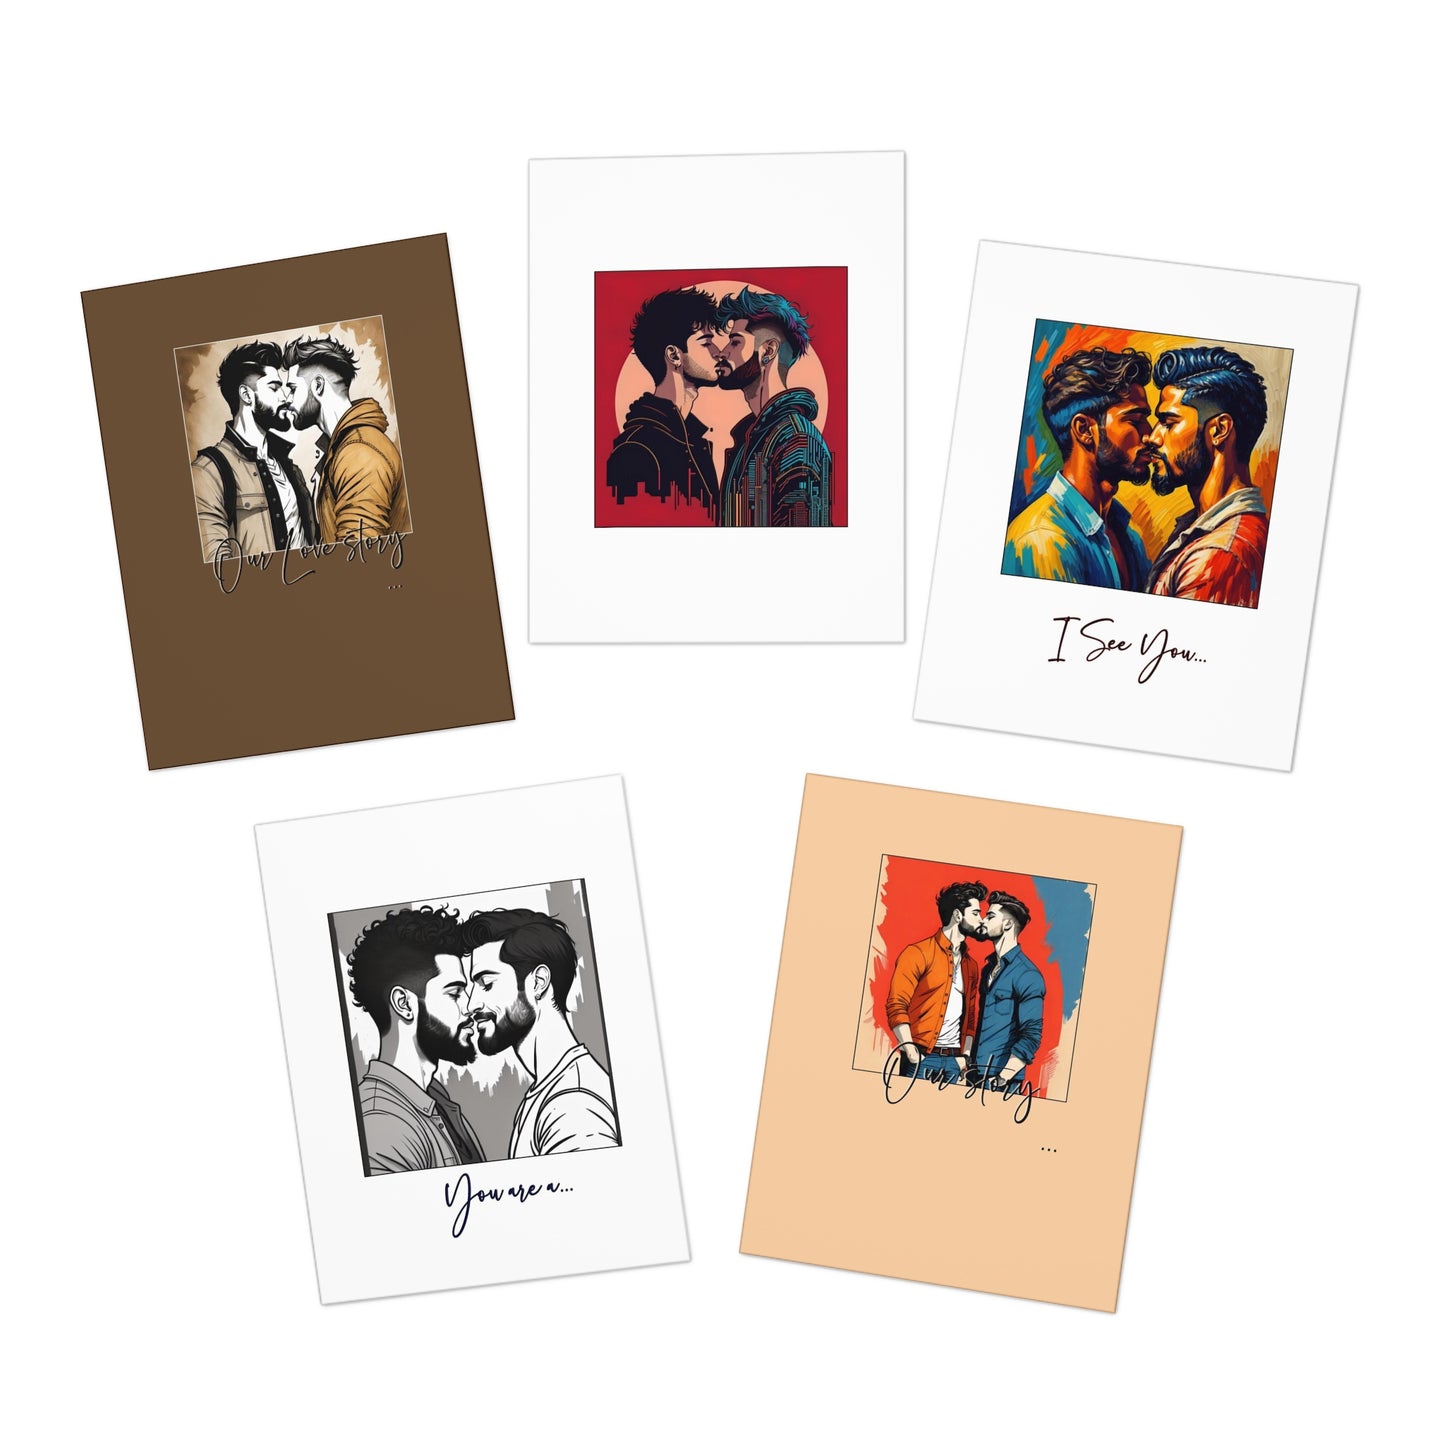 Male Couple Greeting Cards Option 5-Special Occasion-Gay Couple featuring two men-Multi-Design Greeting Cards (5-Pack)-LGBTQ+ Holiday Cards